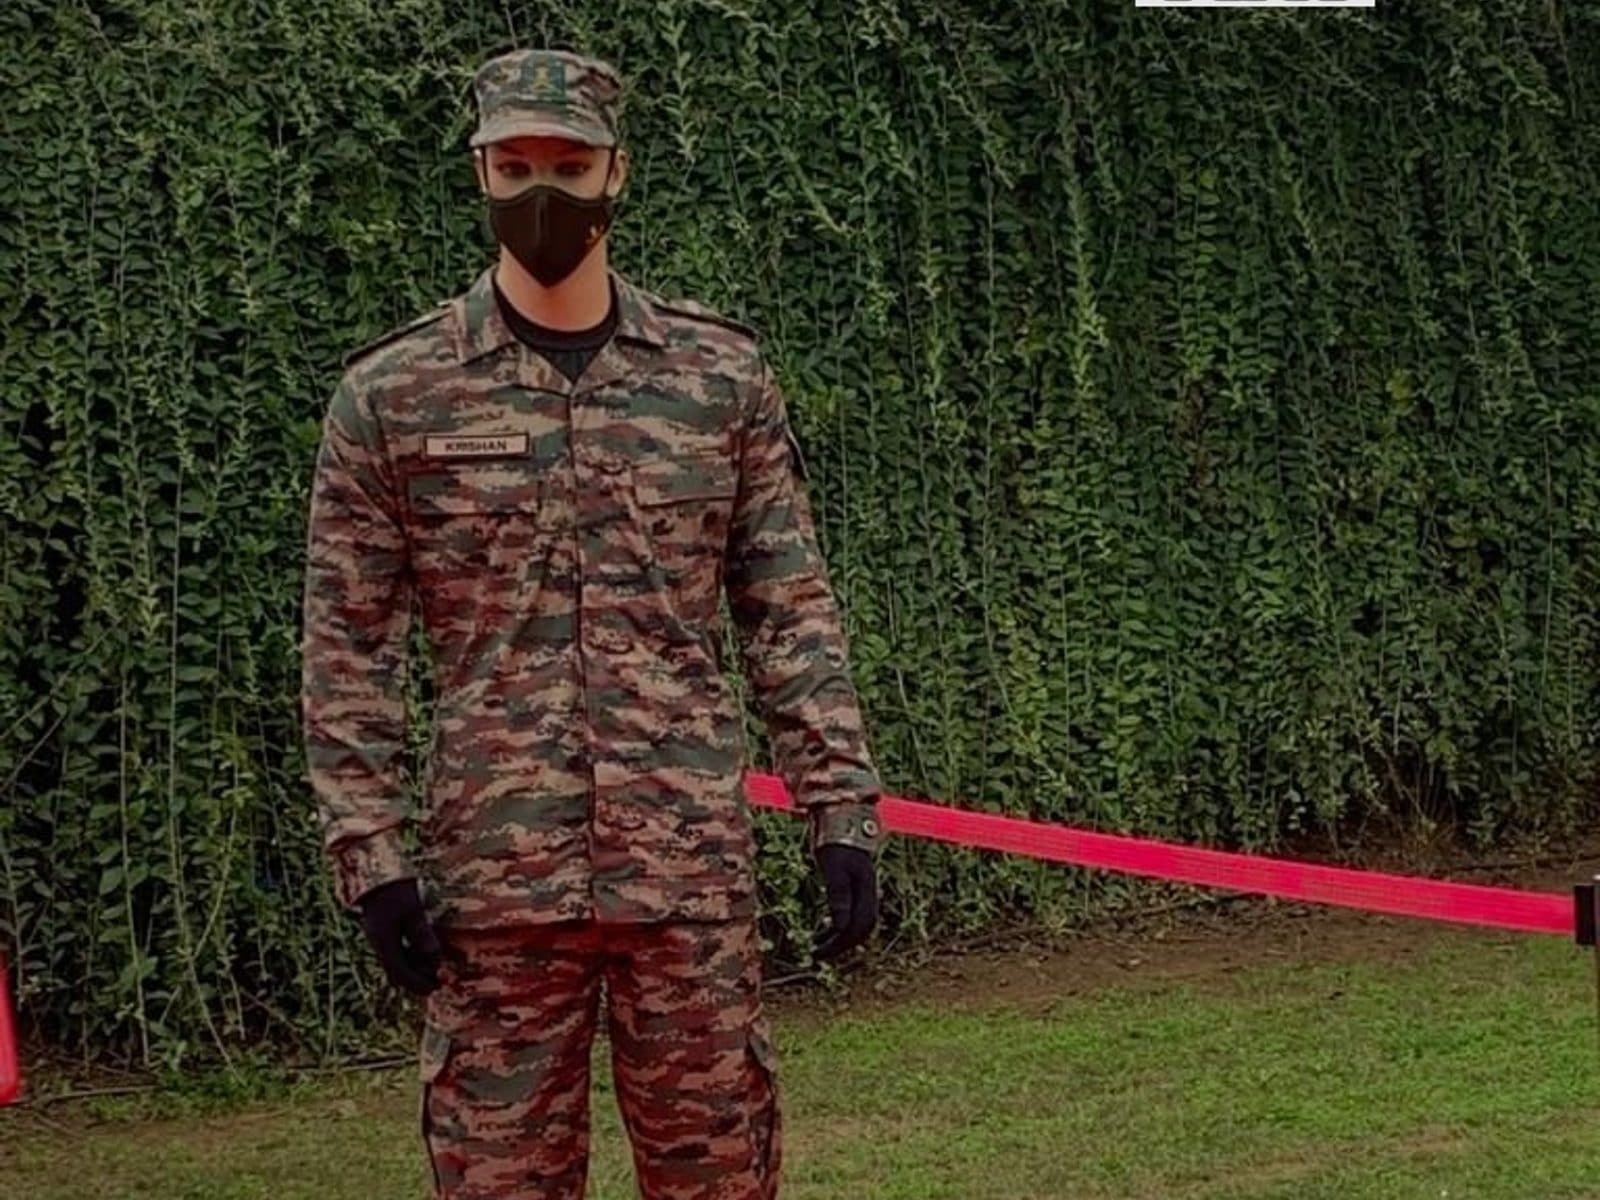 Indians expected to wear camouflage-themed uniforms on Memorial Day